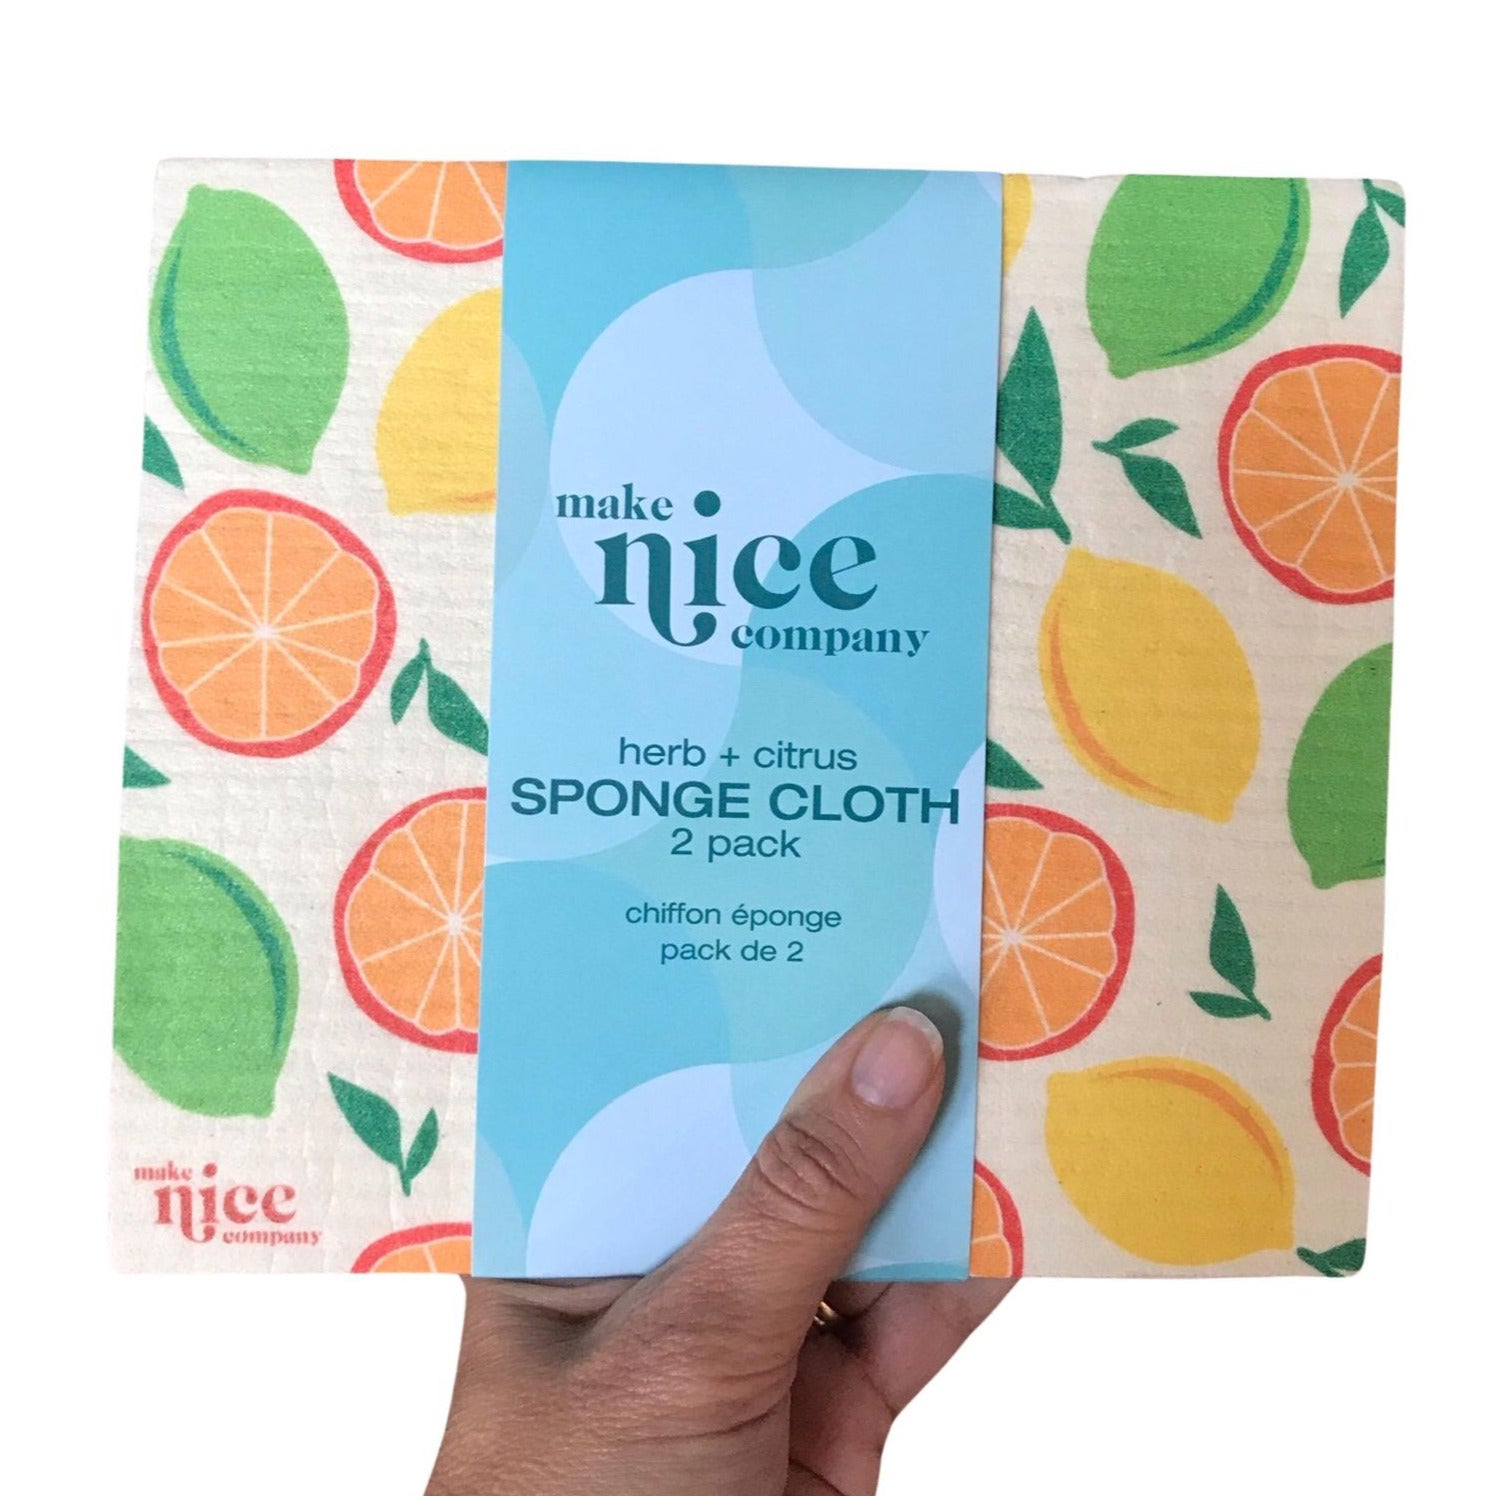 This Sponge Cloth Set from the Make Nice Company features Swedish cloth in a herb pattern and one sponge cloth with a citrus motif offers a plastic-free cleaning alternative to paper towels 